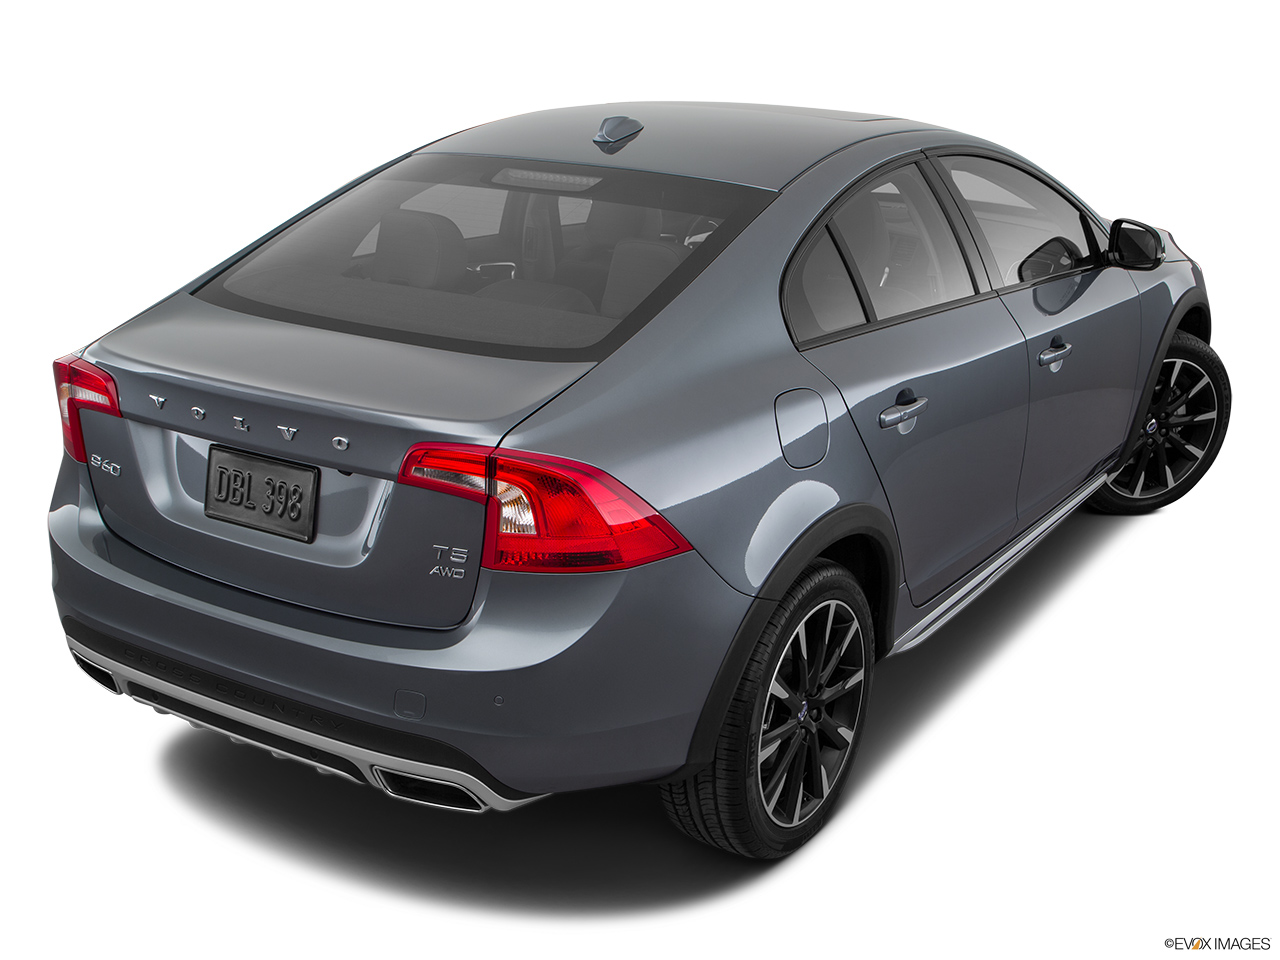 2017 Volvo S60 Cross Country T5 AWD Rear 3/4 angle view. 